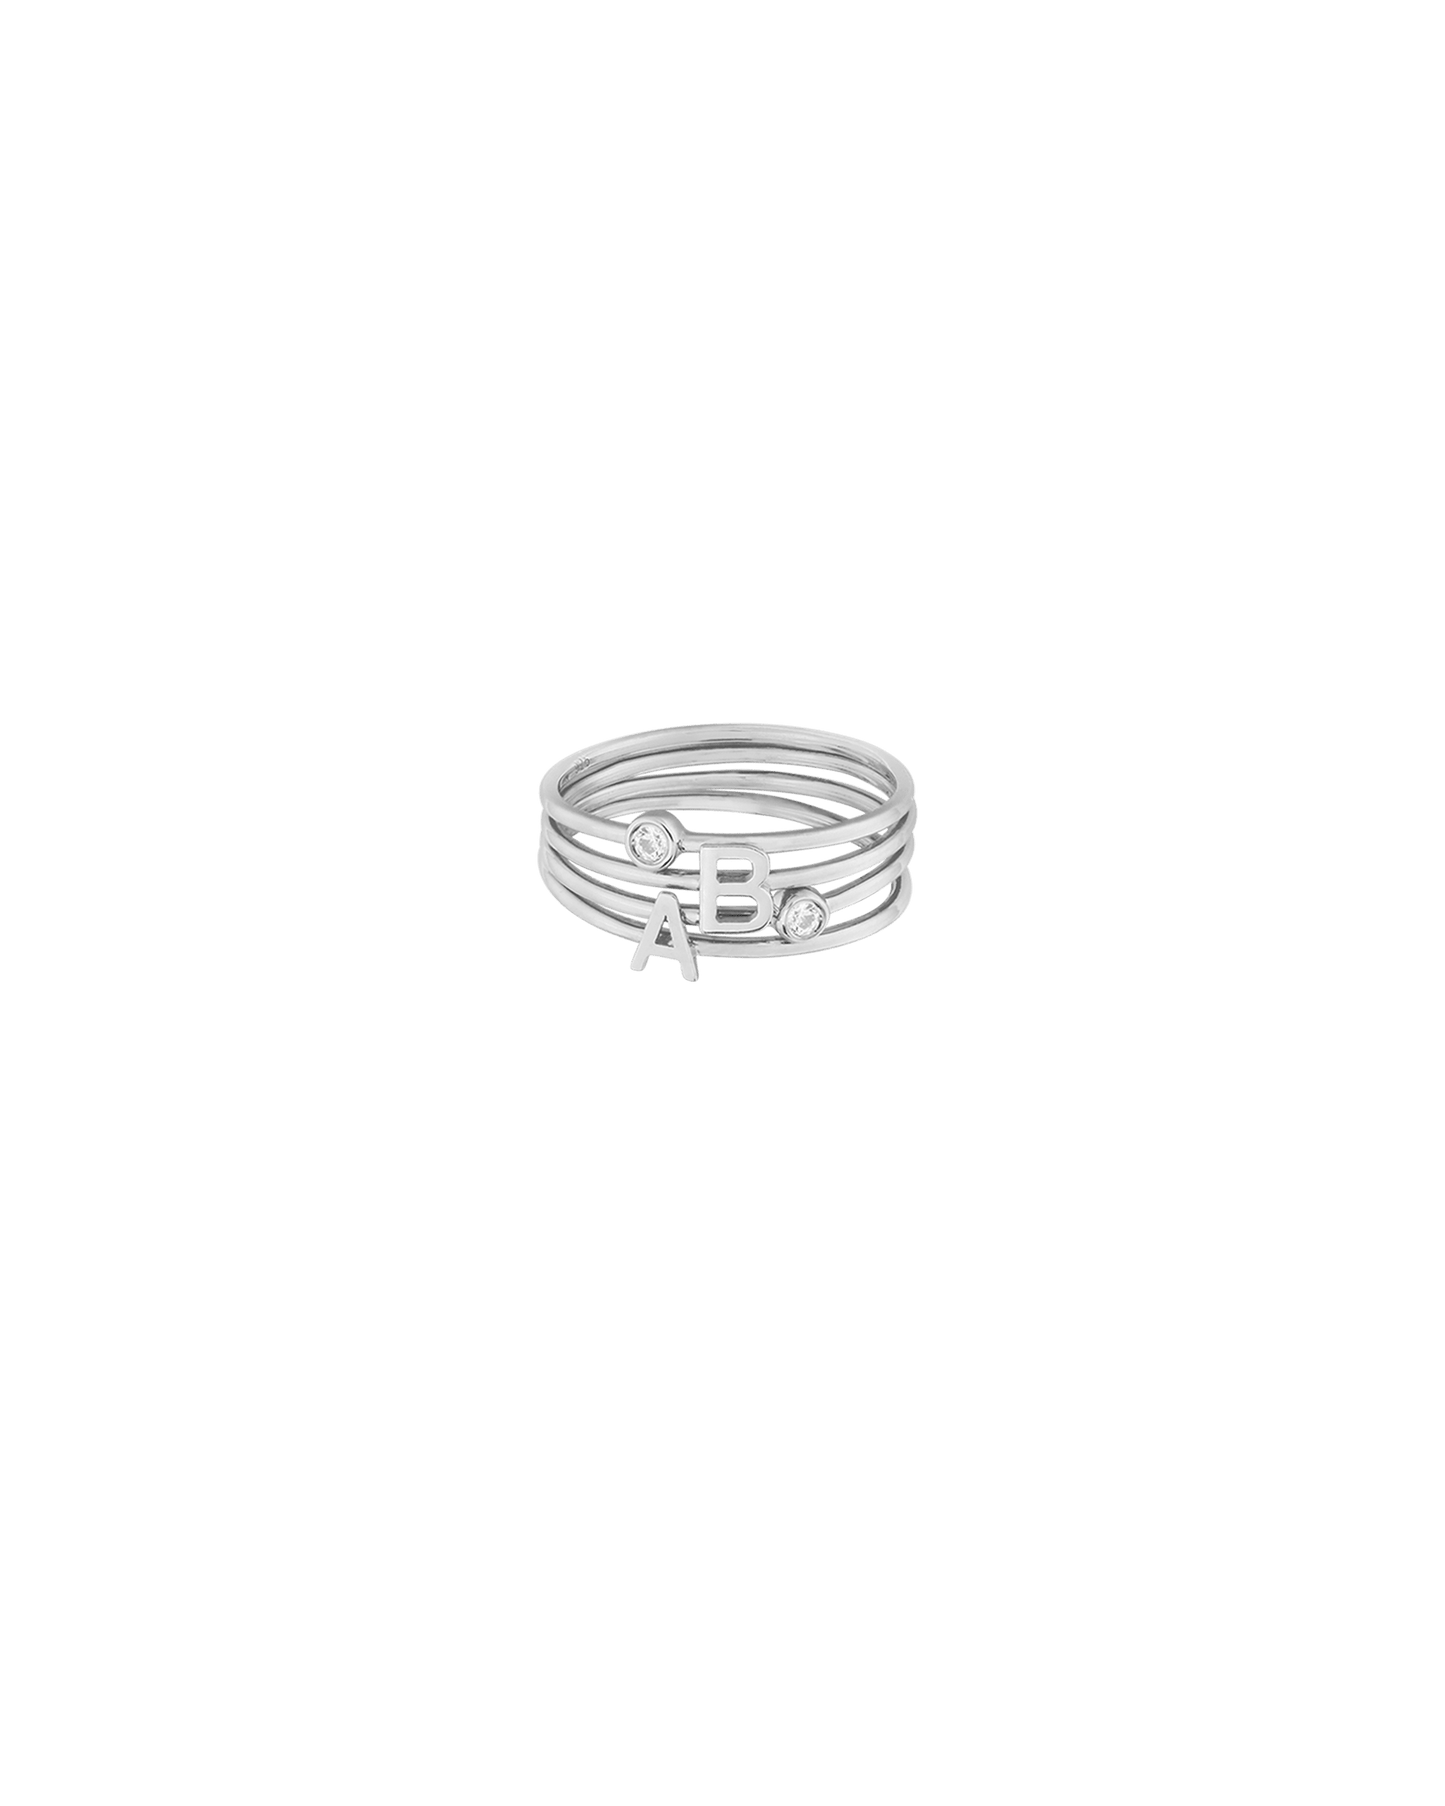 Stackable Initial Ring(s) - 14K White Gold Rings magal-dev 